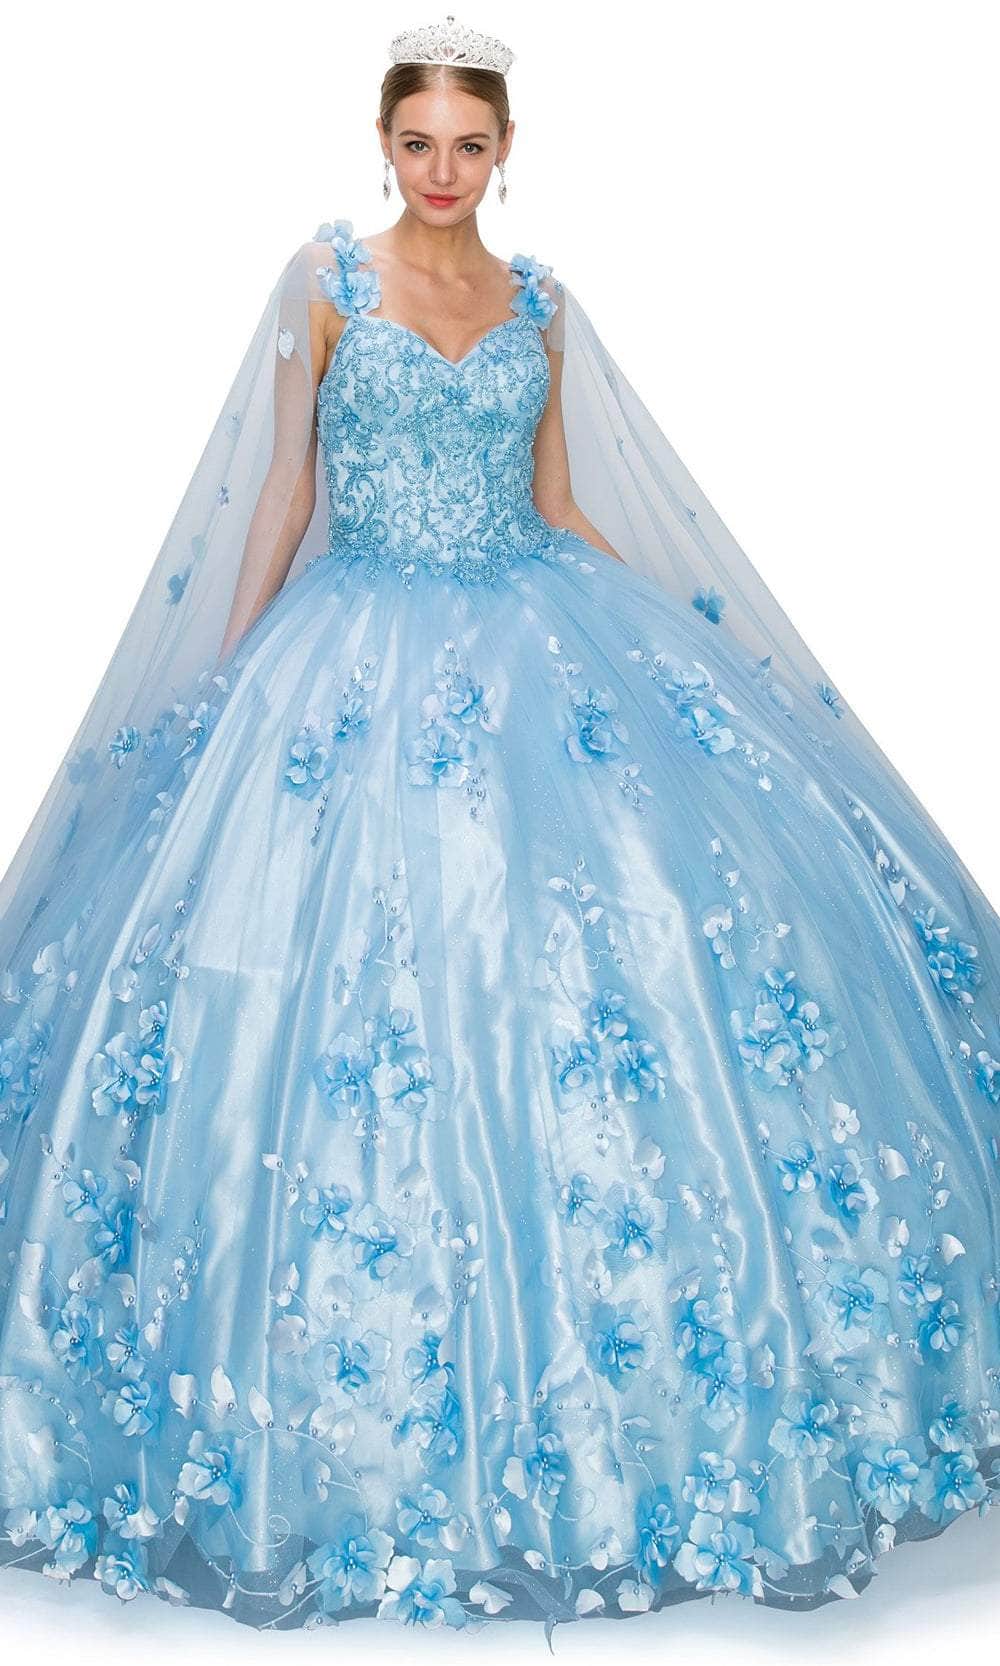 Image of Cinderella Couture 8030J - Sweetheart Floral Appliqued Ballgown